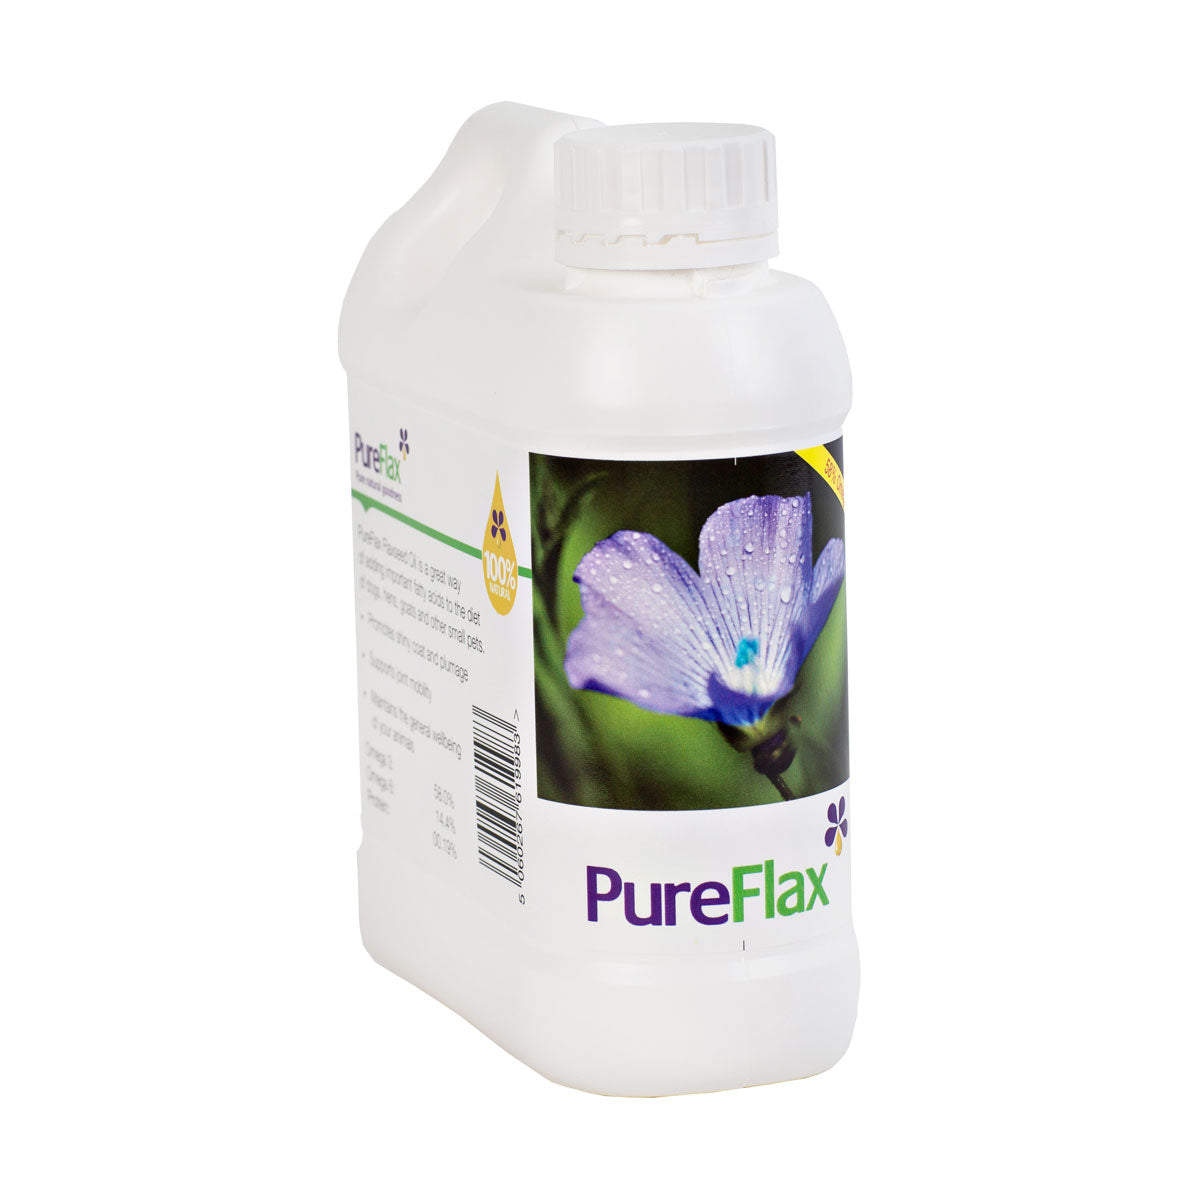 PureFlax Linseed Oil for Dogs